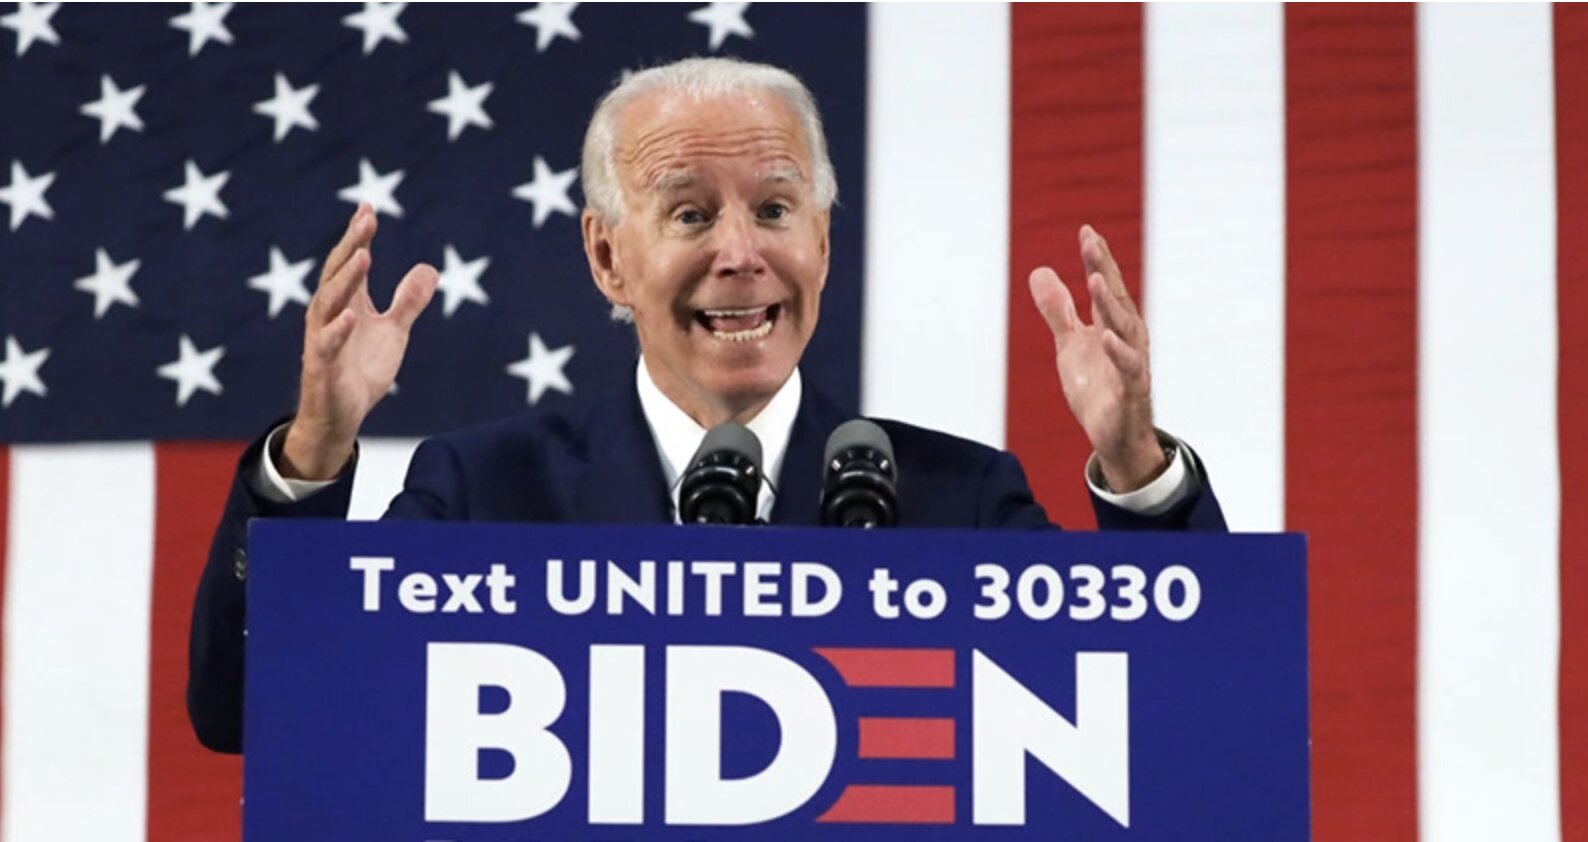 VIDEO: BIDEN SAYS HE HAS “BEEN TESTED” FOR COGNITIVE DECLINE AND IS “CONSTANTLY TESTED”